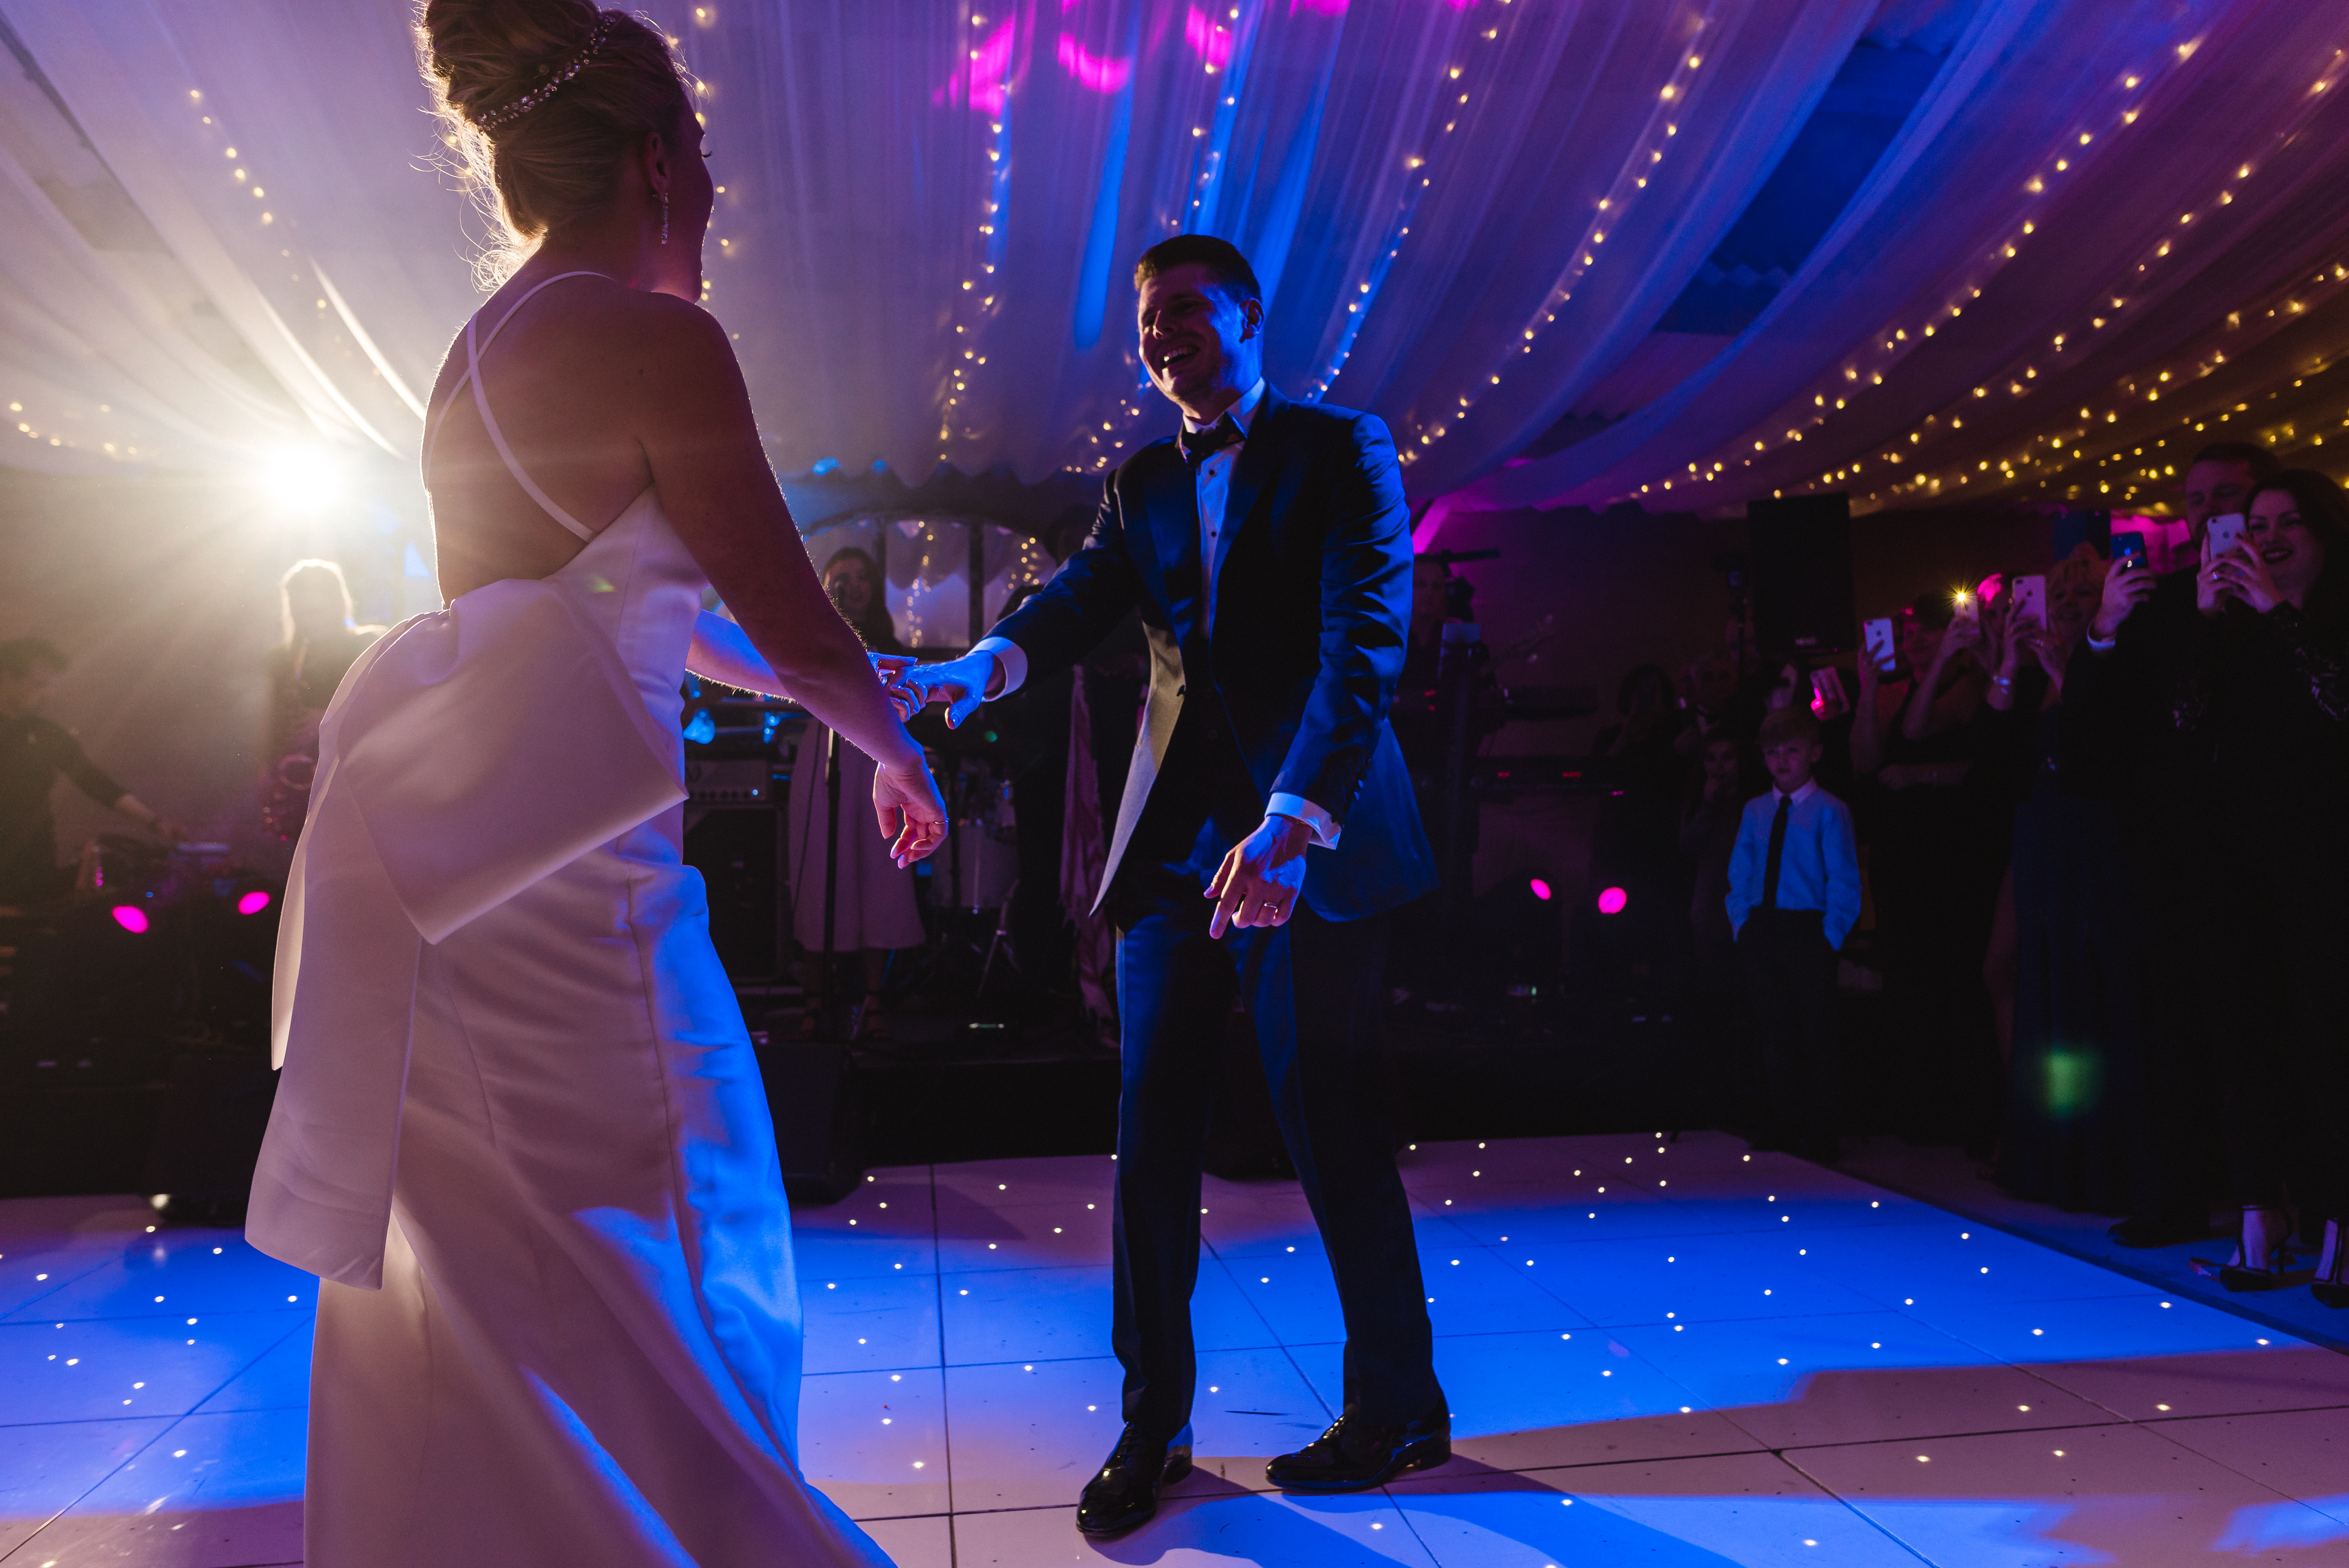 100 Songs About Marriage to Add to Your Wedding Playlist